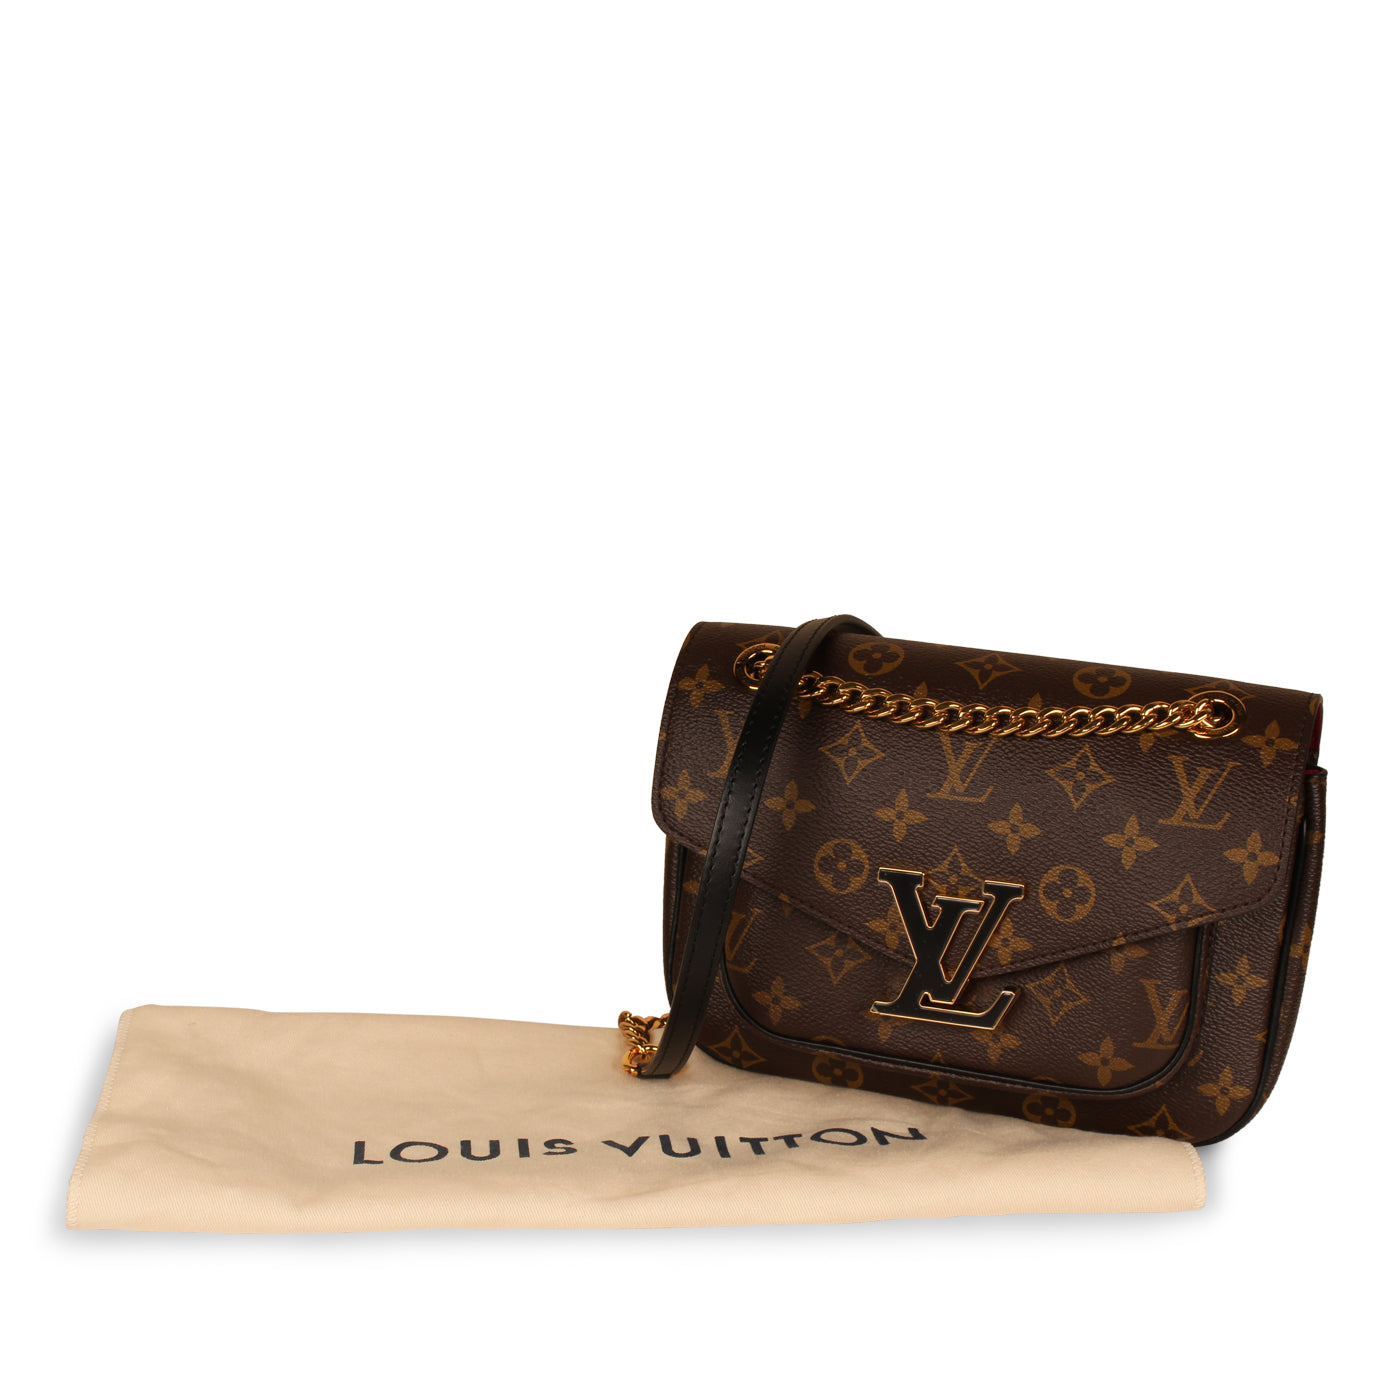 Louis Vuitton Passy Bag - For Sale on 1stDibs  lv passy outfit, passy bag  lv, lv passy bag outfit